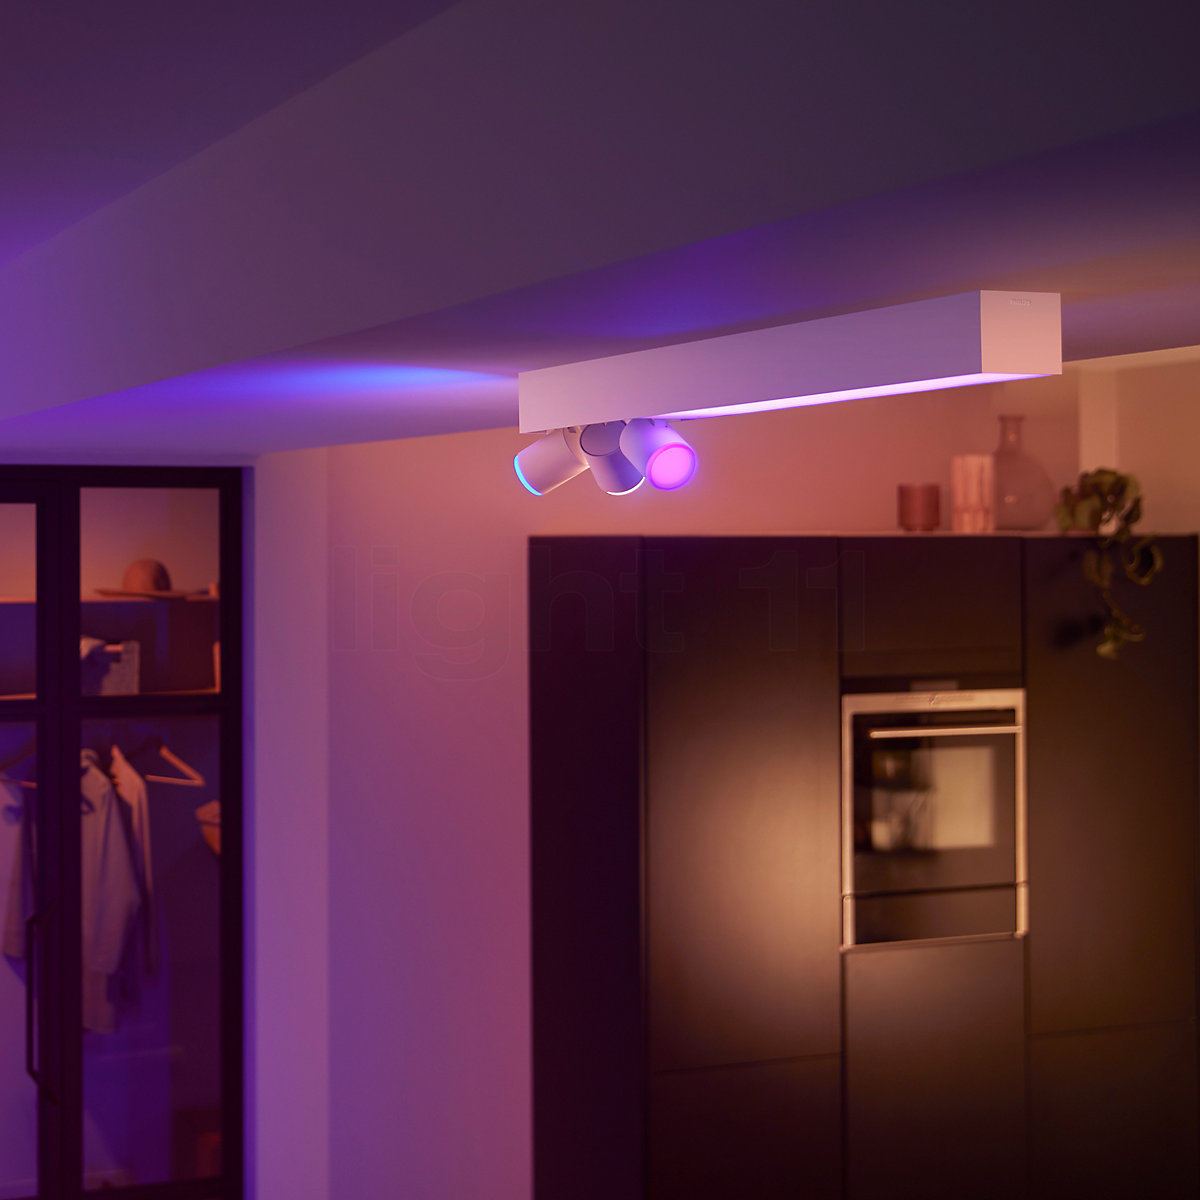 Philips Hue White And Color Ambiance Centris Spot LED 4 foyers